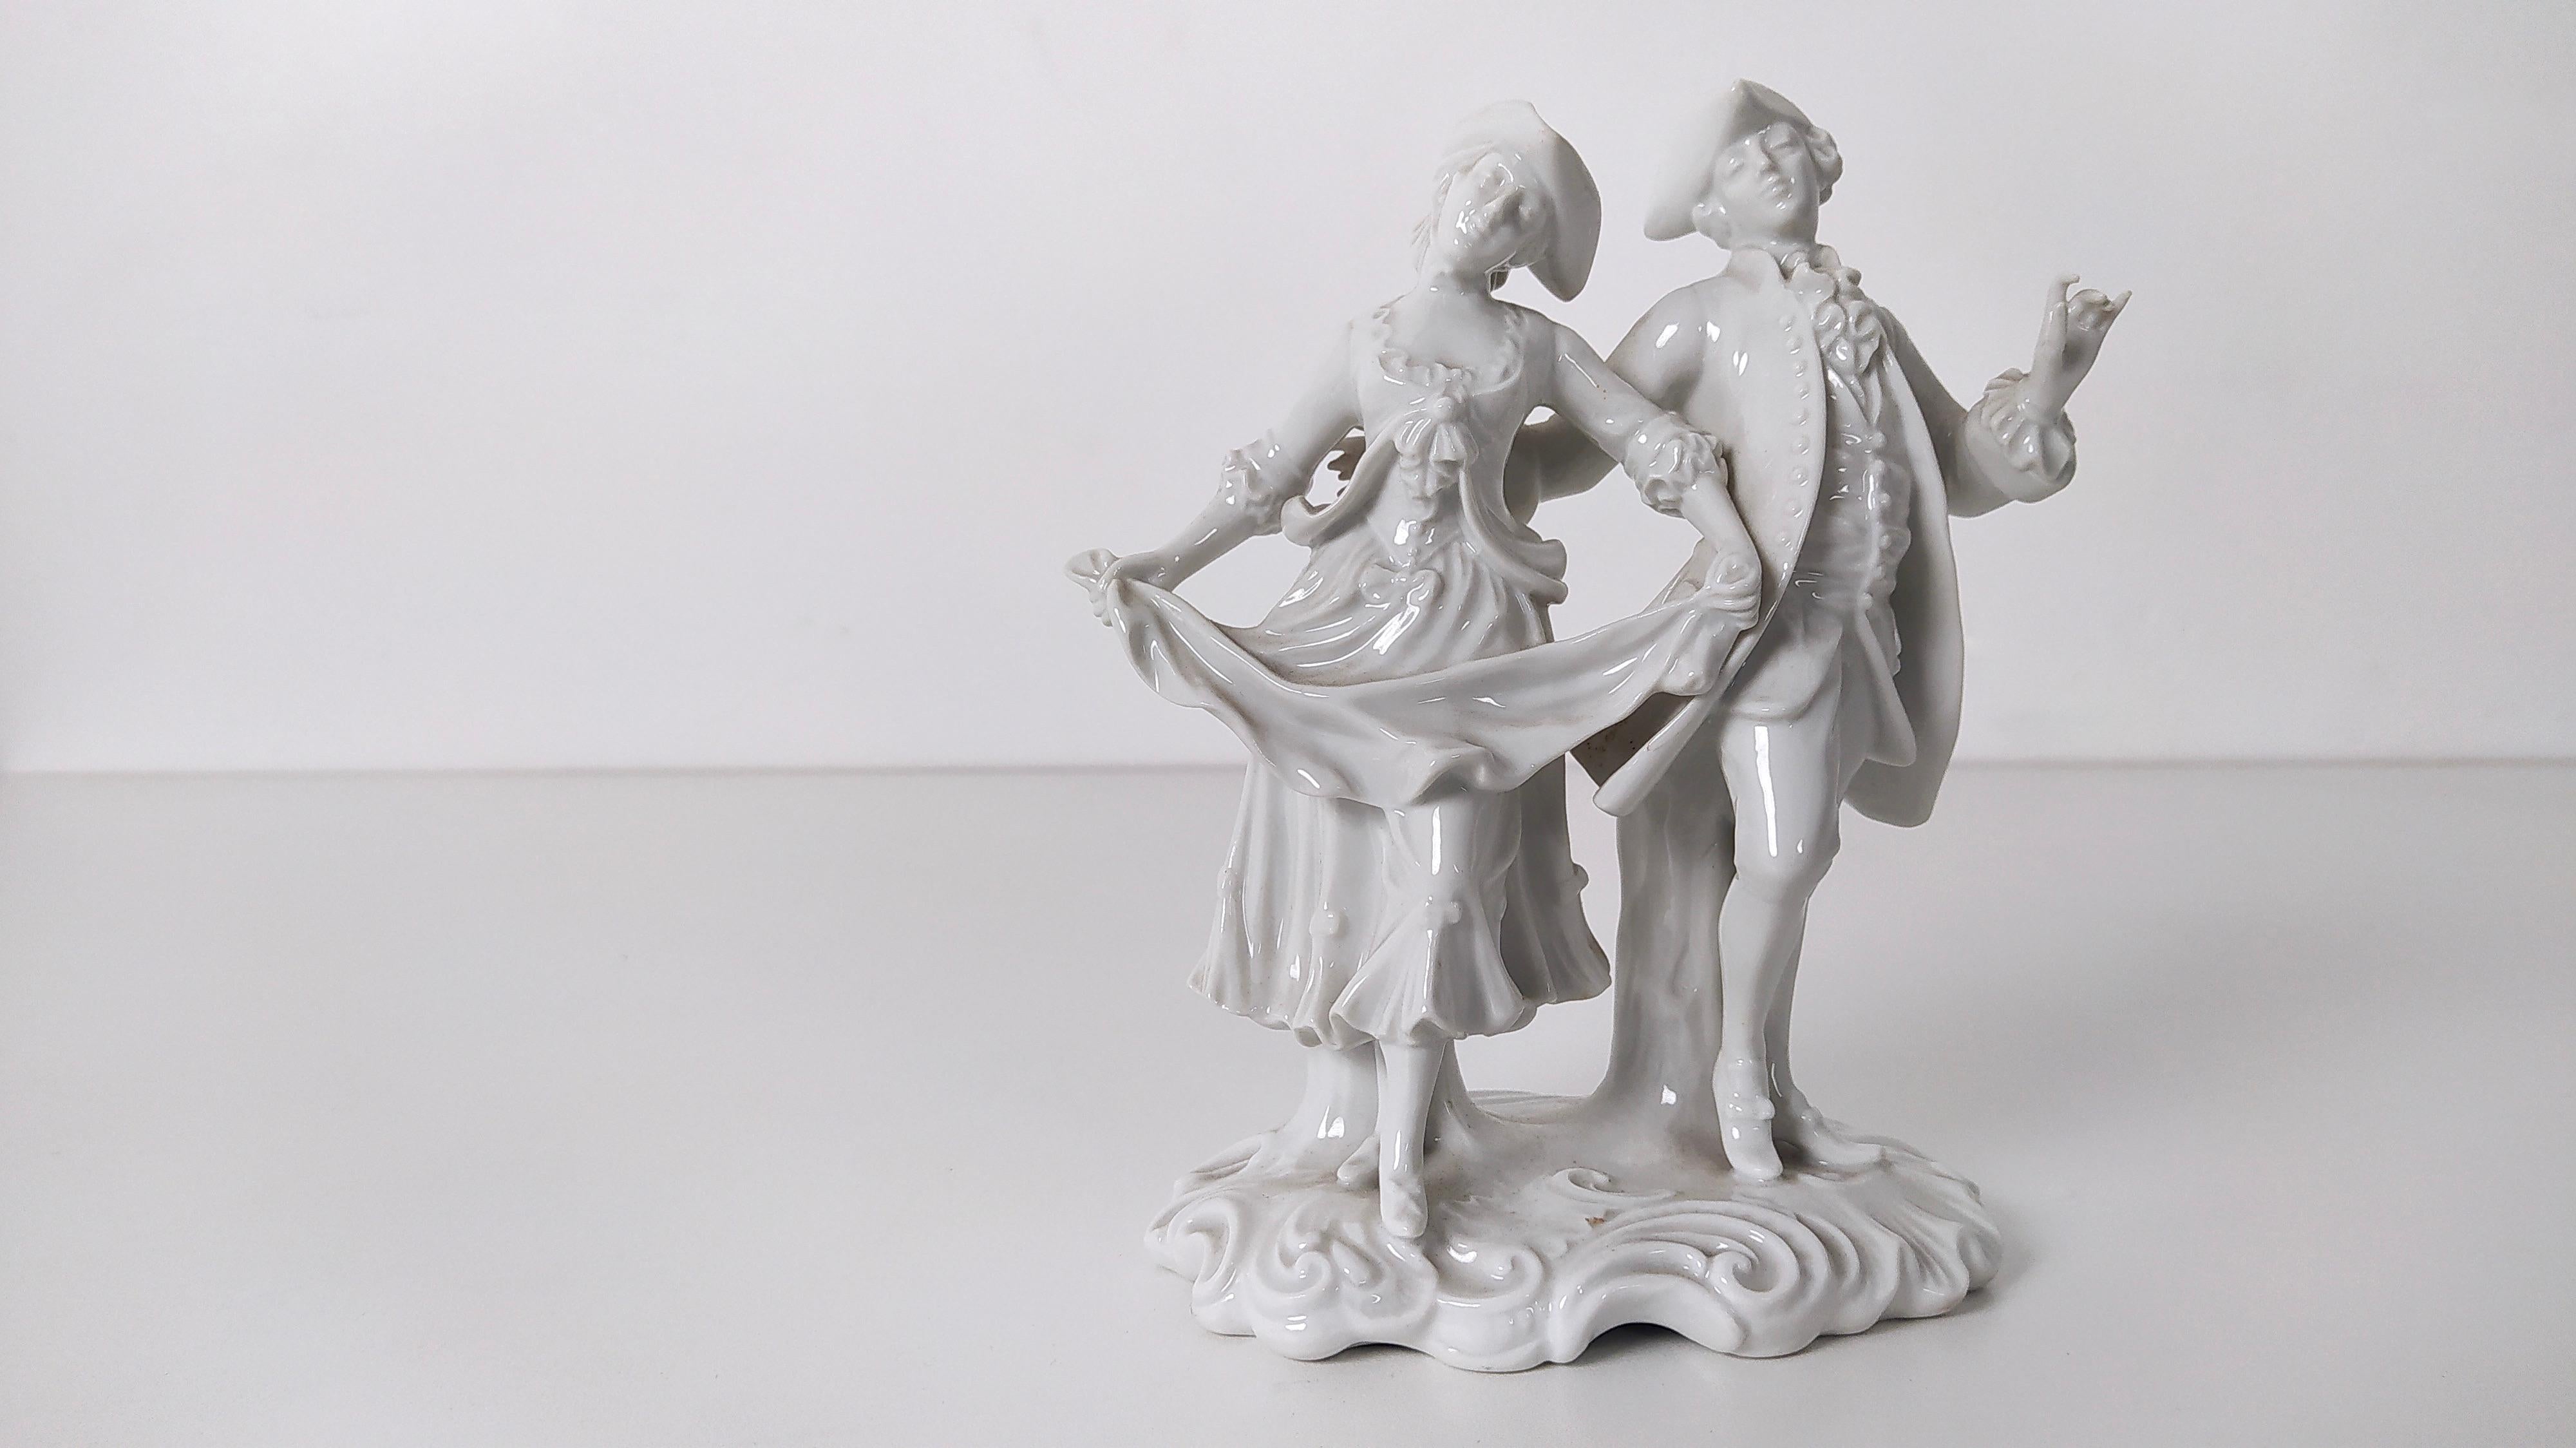 Made in Italy, 1960s.
These two 18th century figures are made in Capodimonte porcelain.
This statue might show slight traces of use since it's vintage, but it can be considered as in excellent original condition and ready to become a piece in a